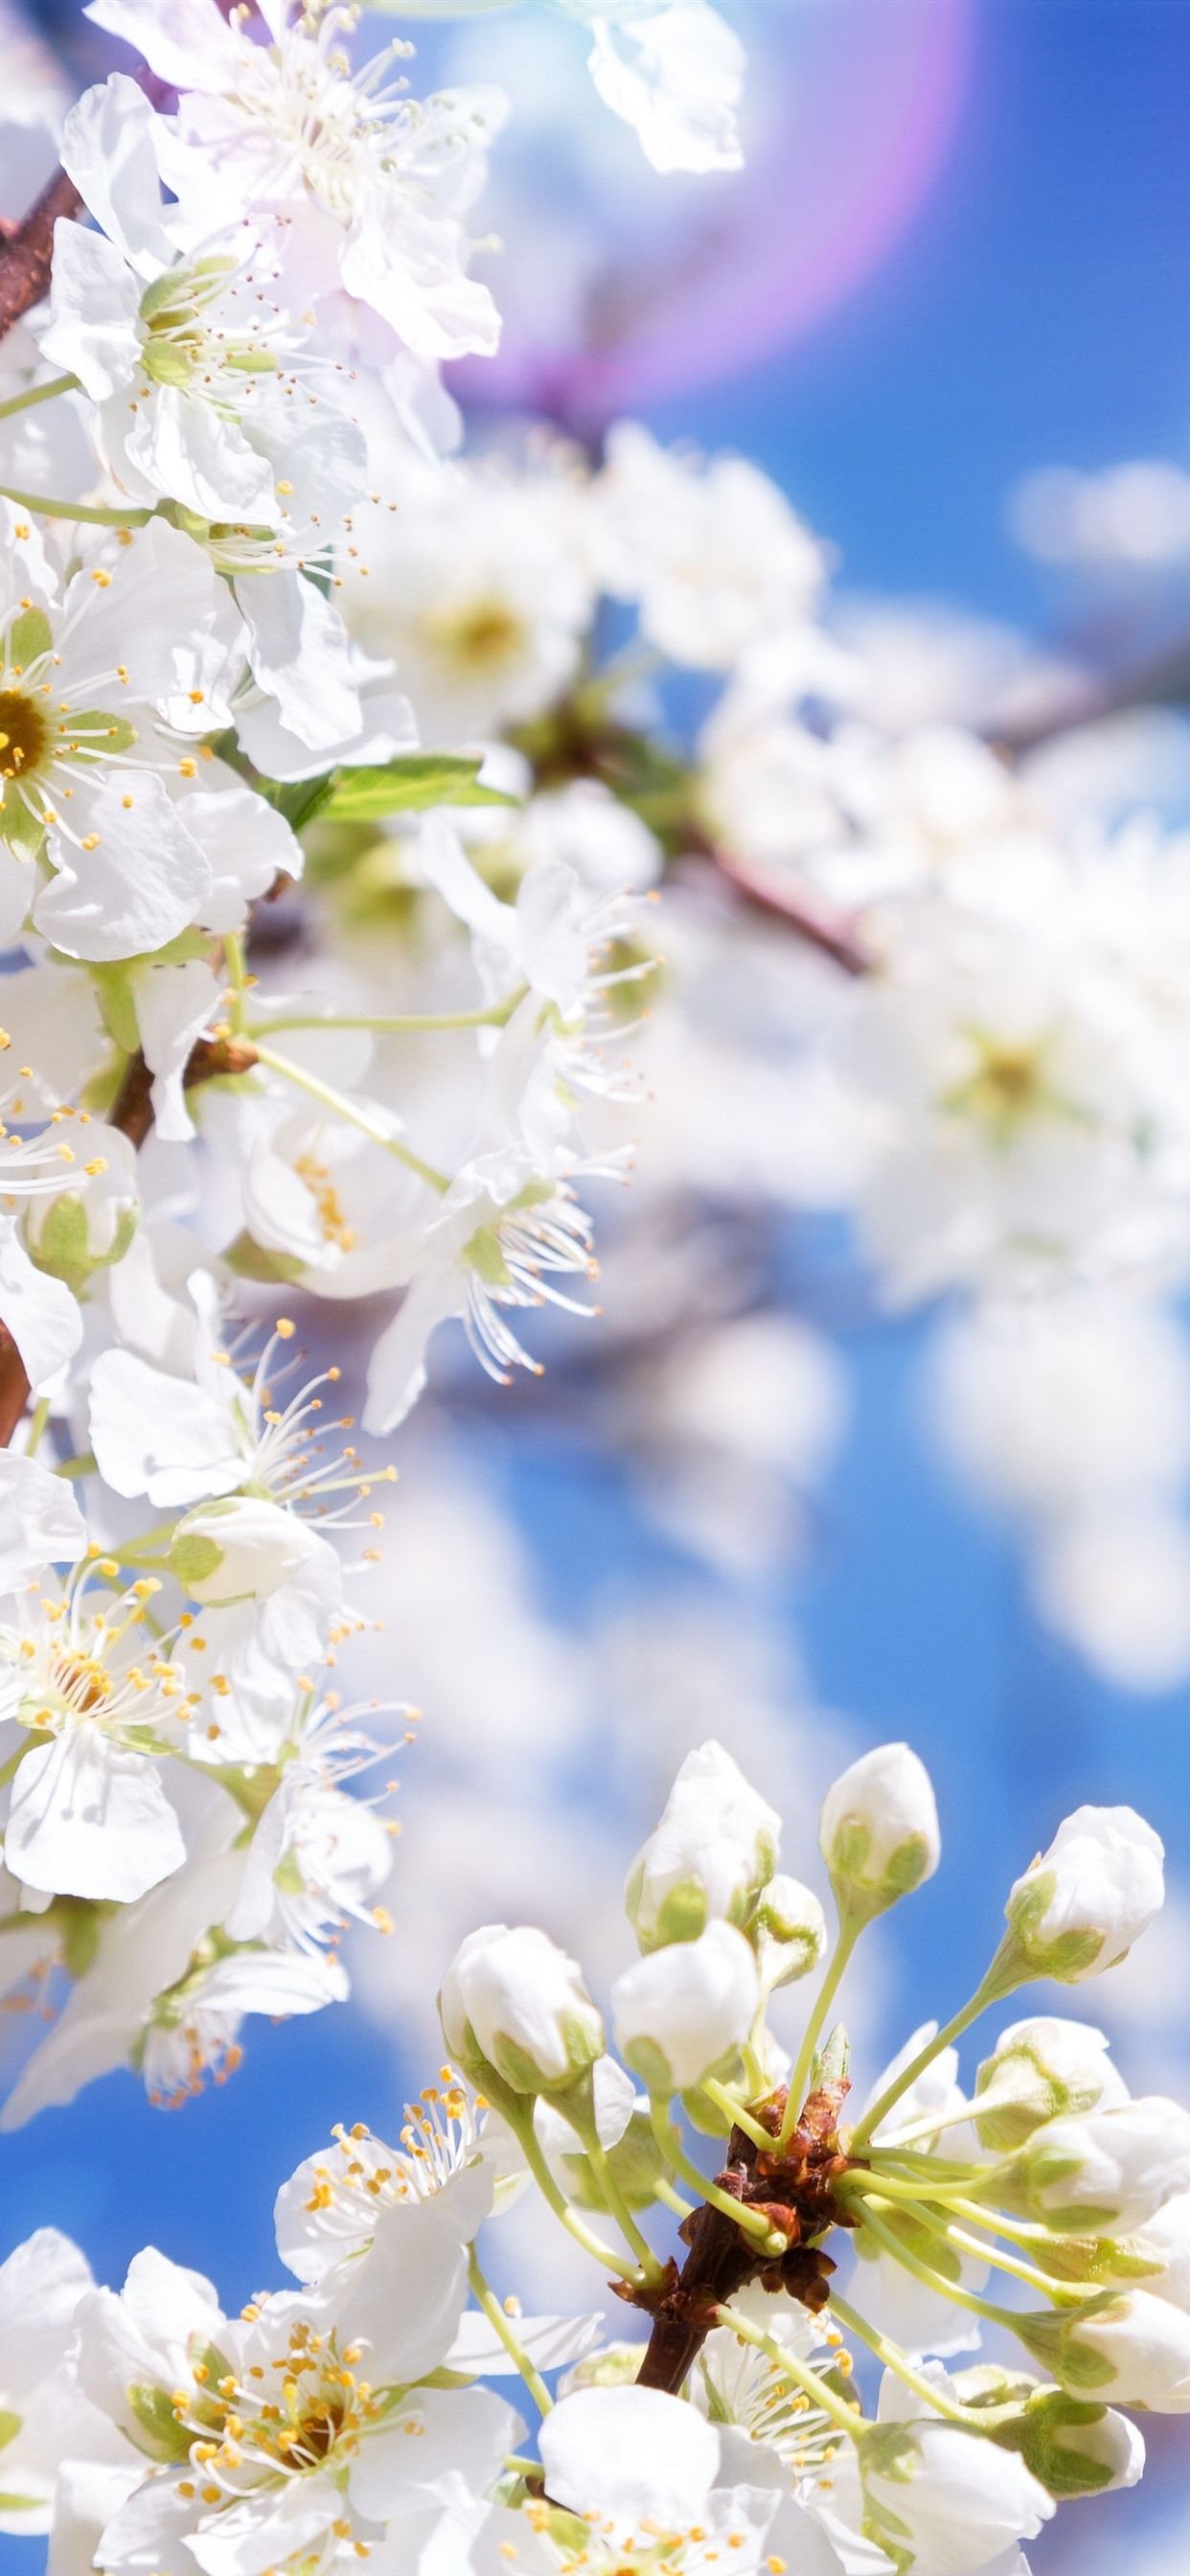 White Apple Flowers, Blossom, Spring, Sun Rays 1242x2688 IPhone 11 Pro XS Max Wallpaper, Background, Picture, Image